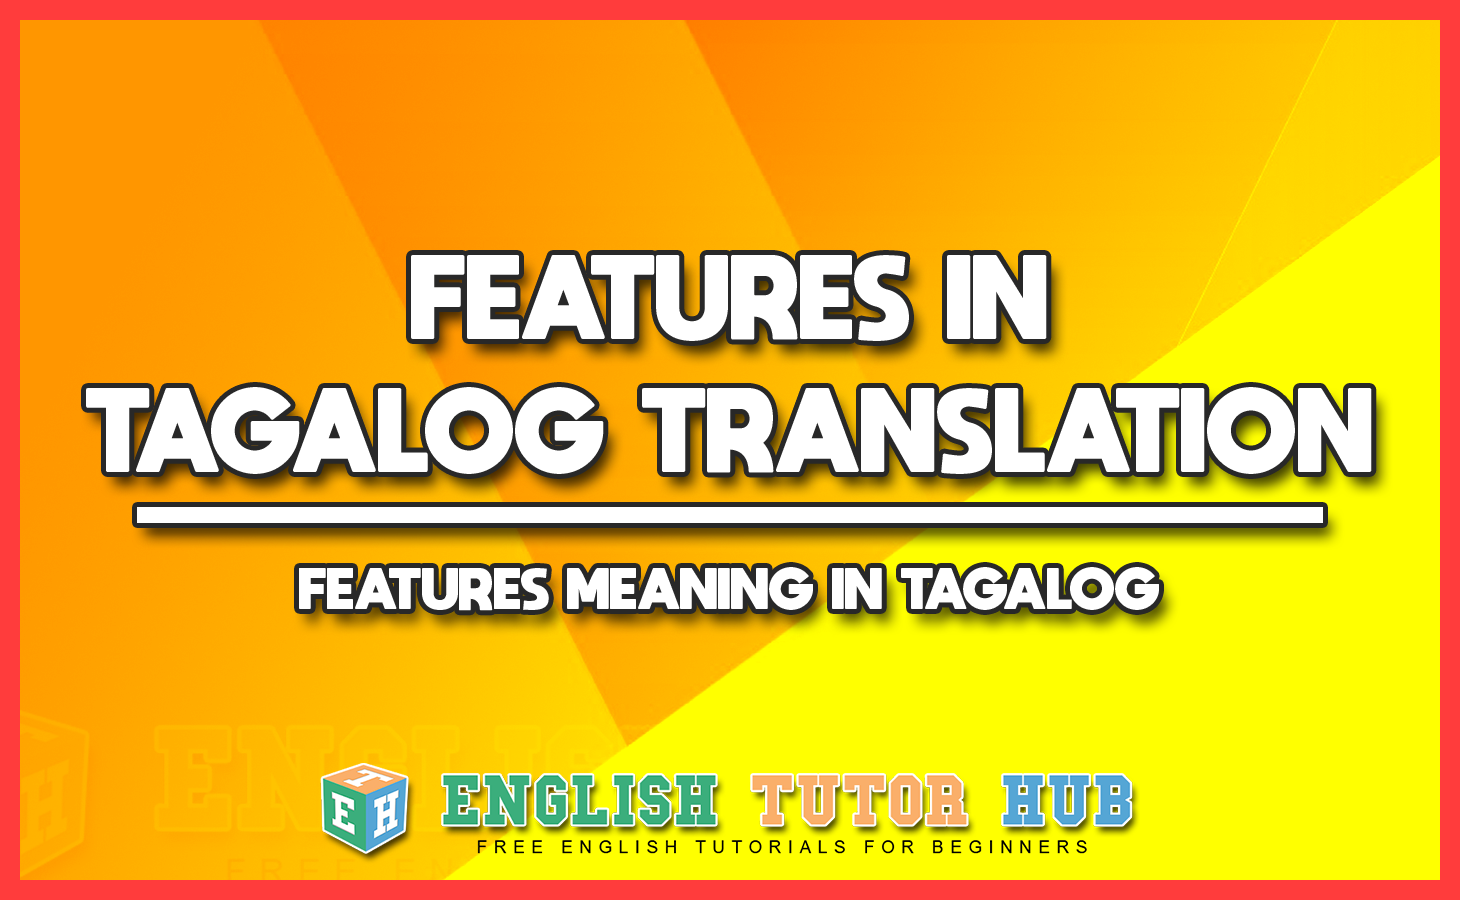 FEATURES IN TAGALOG TRANSLATION - FEATURES MEANING IN TAGALOG